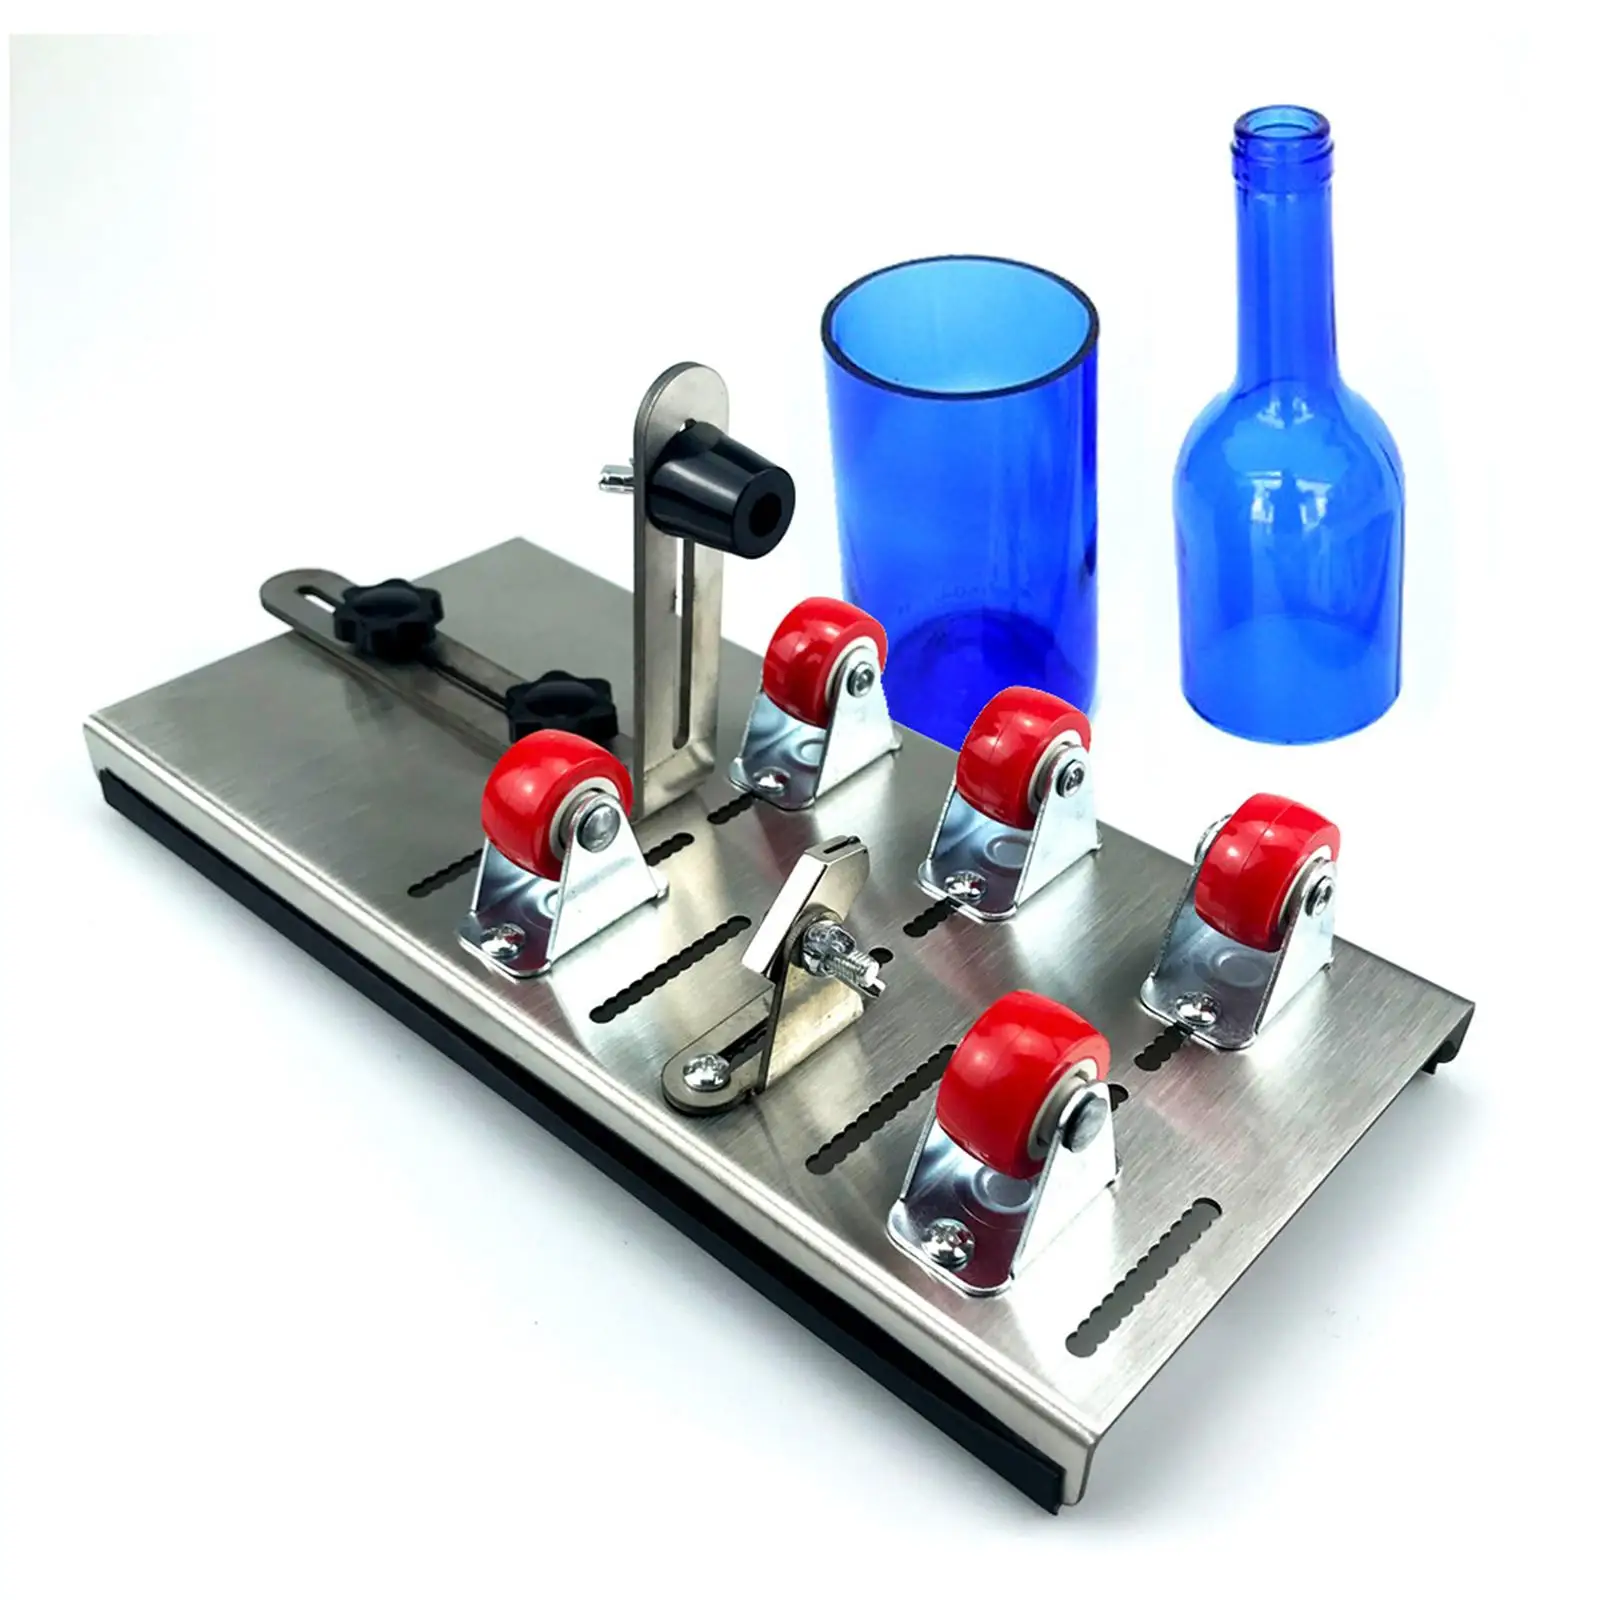 Glass Bottle Cutter Set Multifunctional DIY Project Crafts Professional for